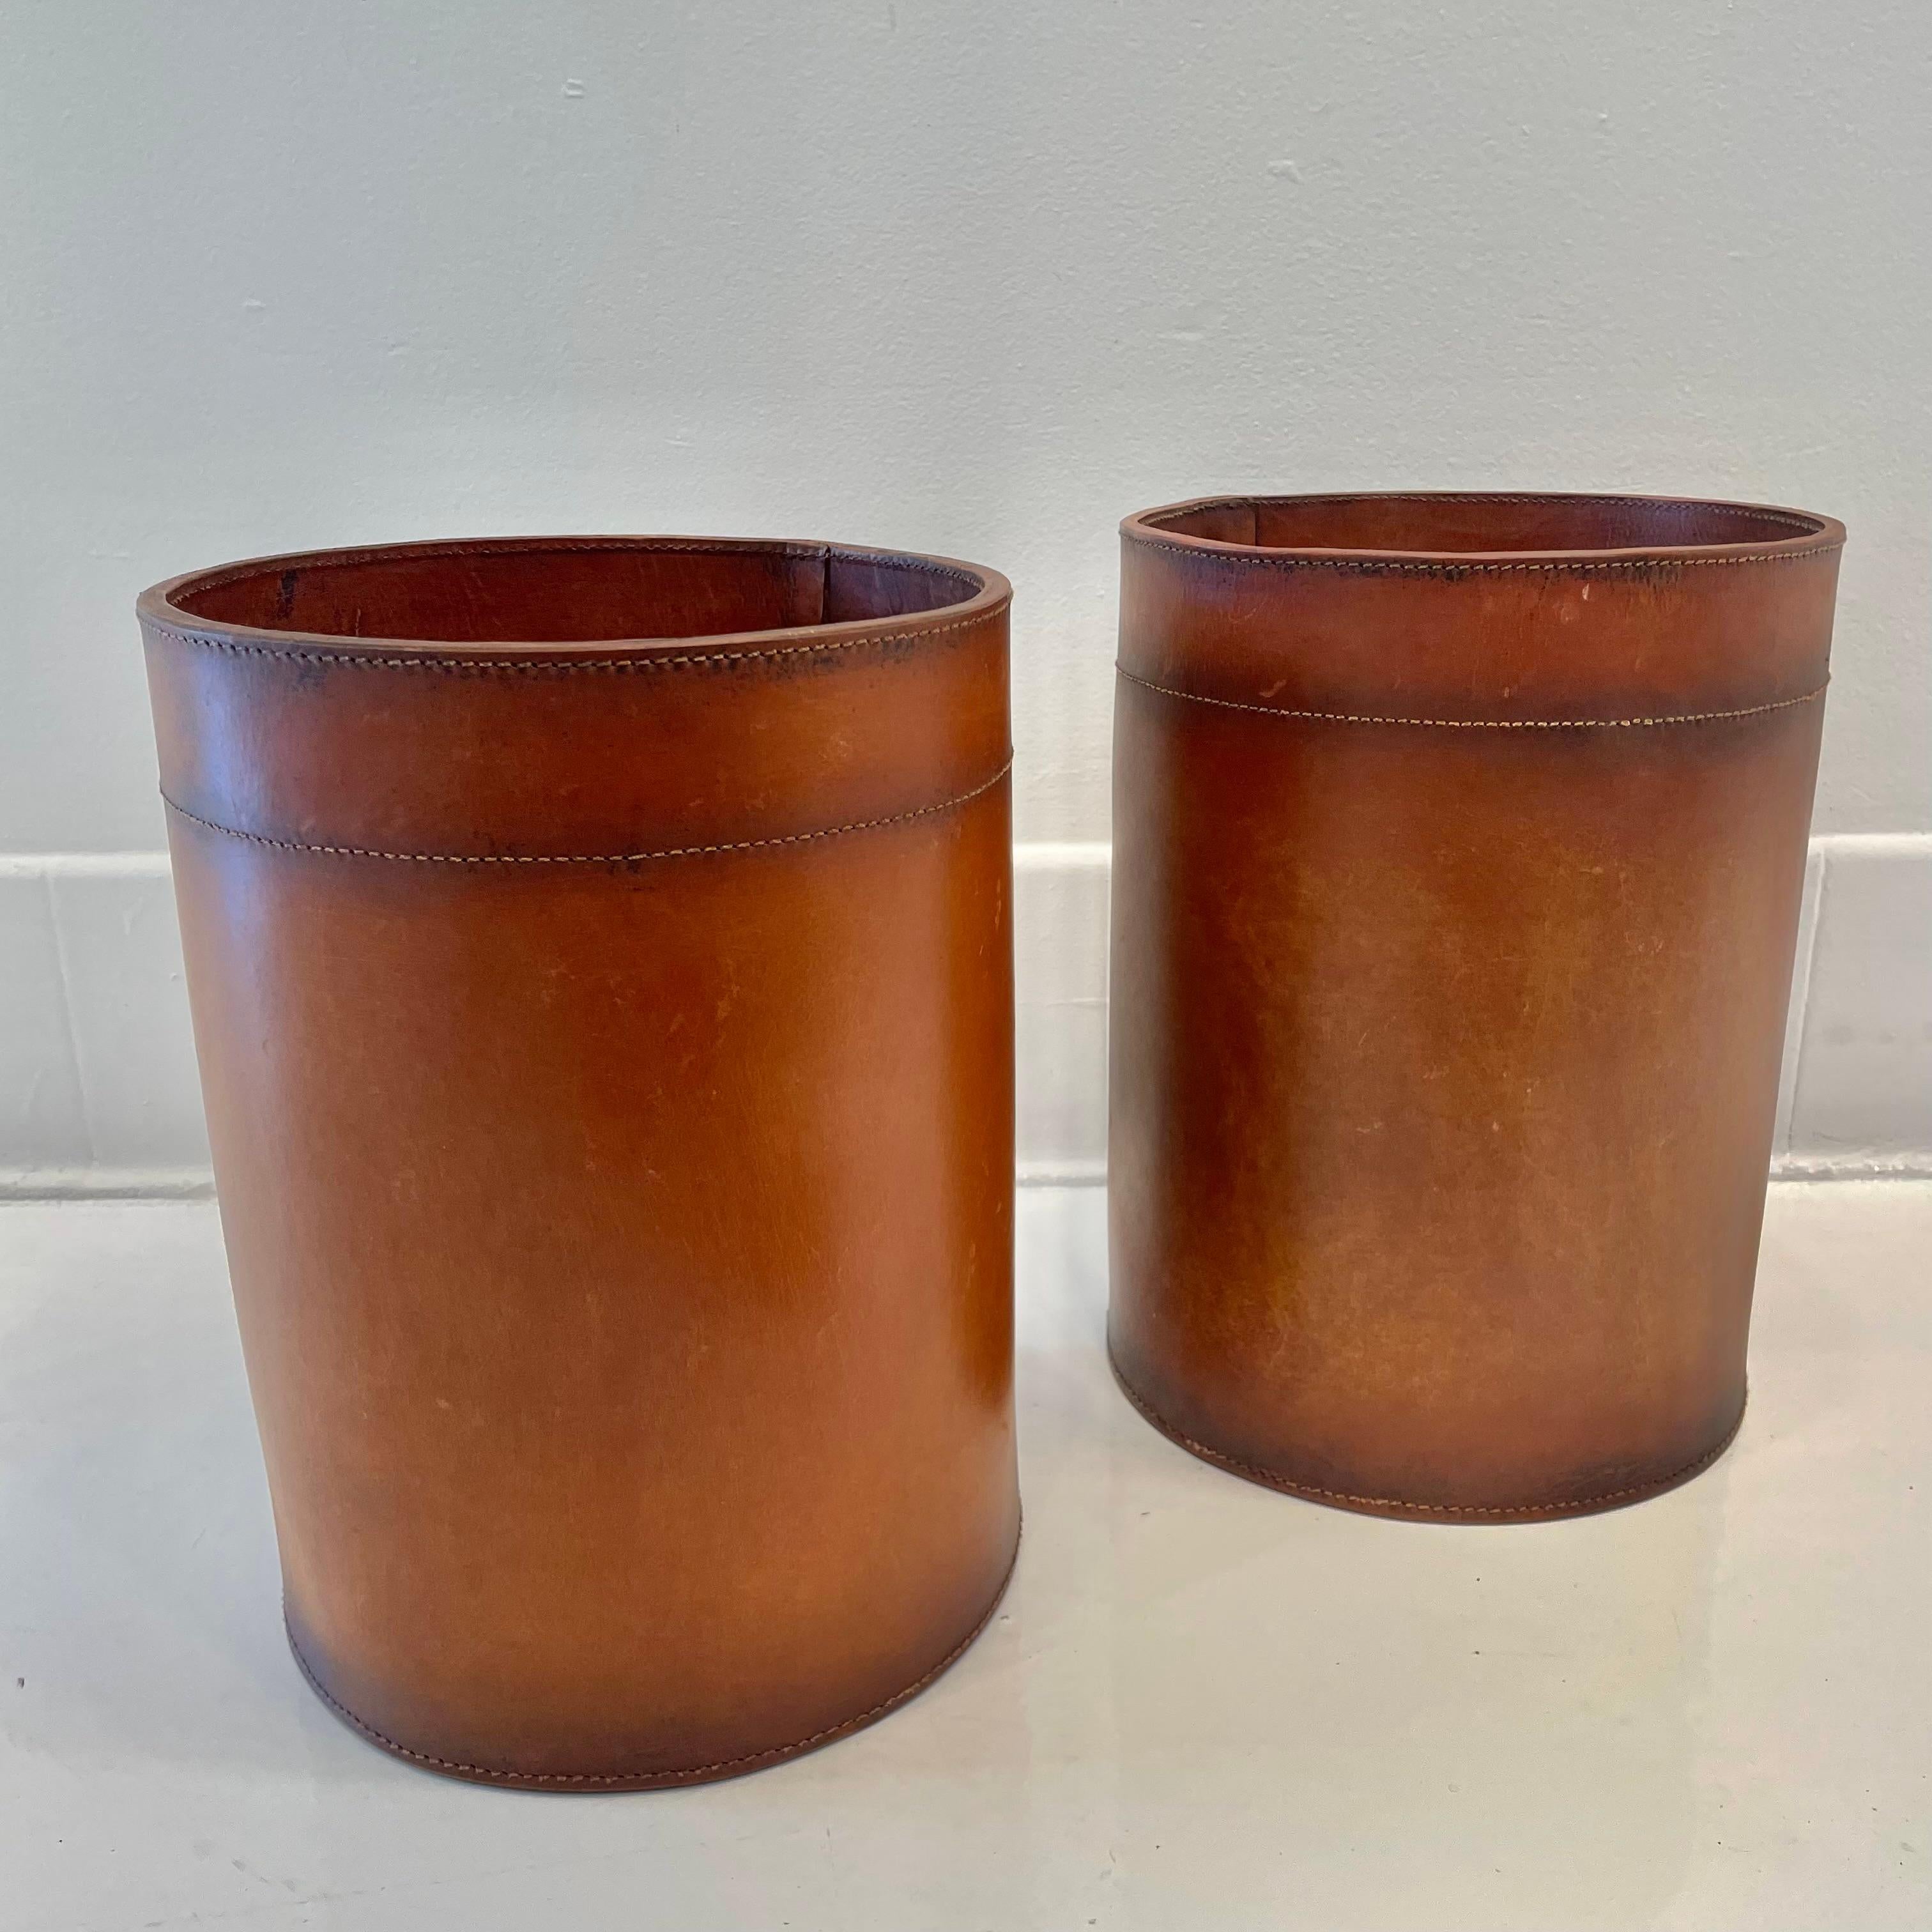 Beautiful leather waste bin in the style of Jacques Adnet produced by Merit Los Angeles. Made entirely of a thick cowhide leather in a distressed saddle color. High quality leather patina'd and aged by leather artisans. 3-4 week lead time. Priced